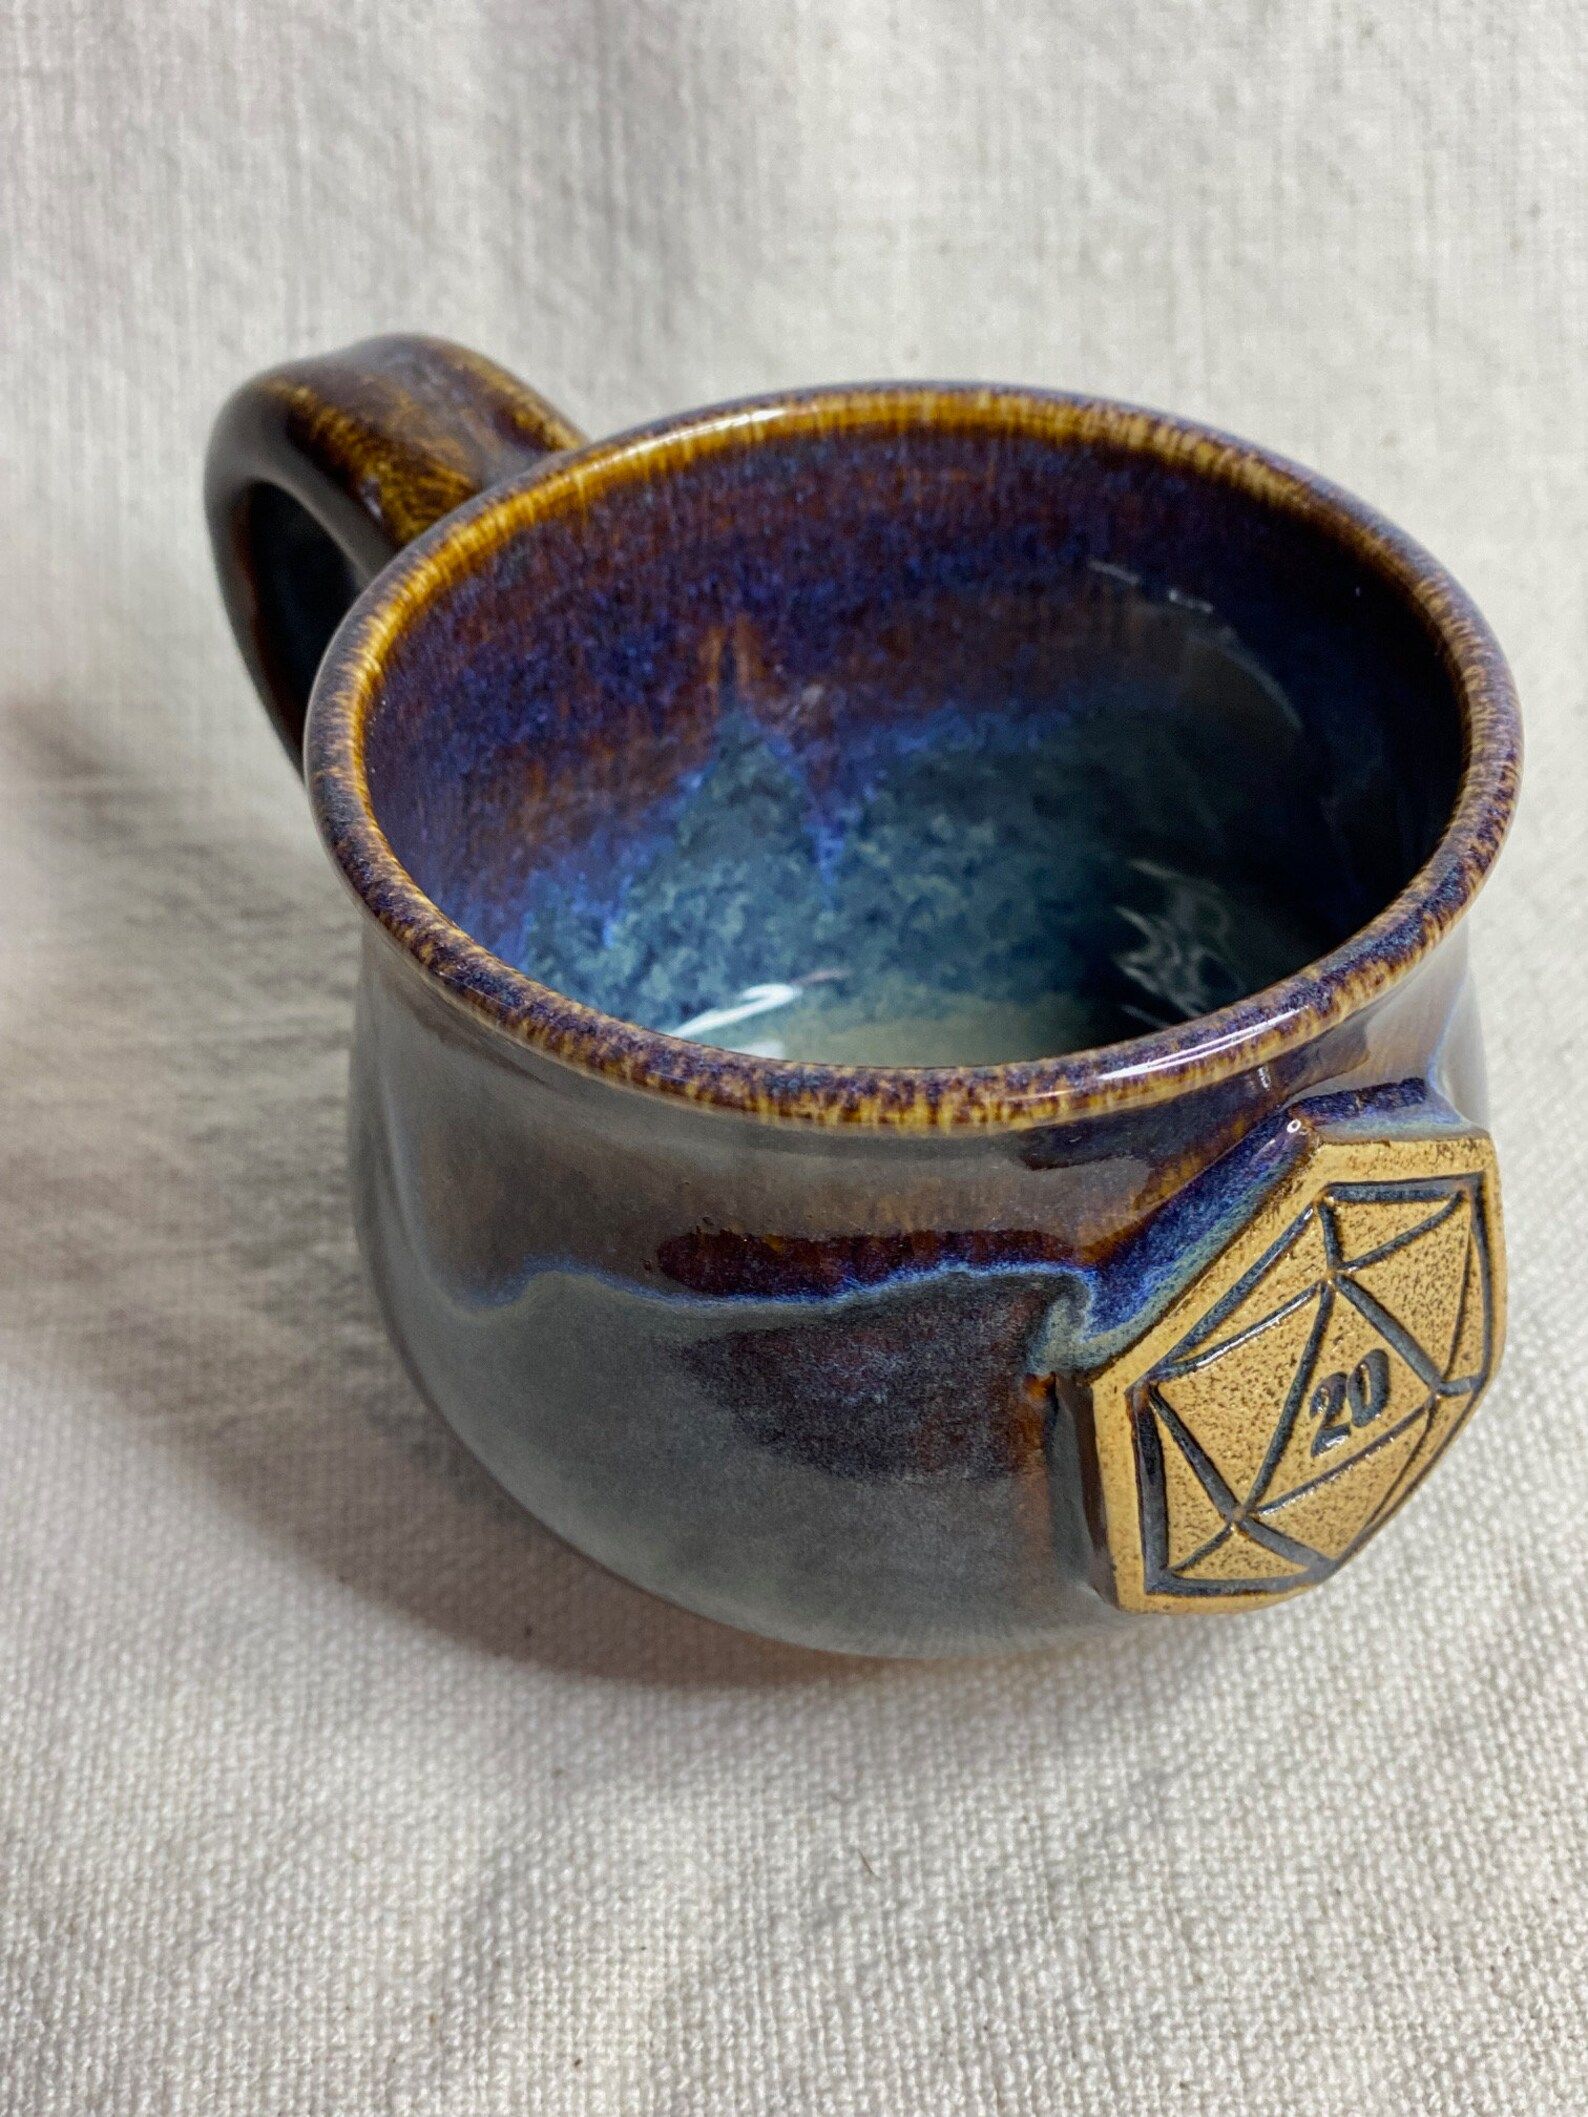 A blue and purple ceramic mug with a natural 20 on a 20 sided dice on the front sits on white fabric.